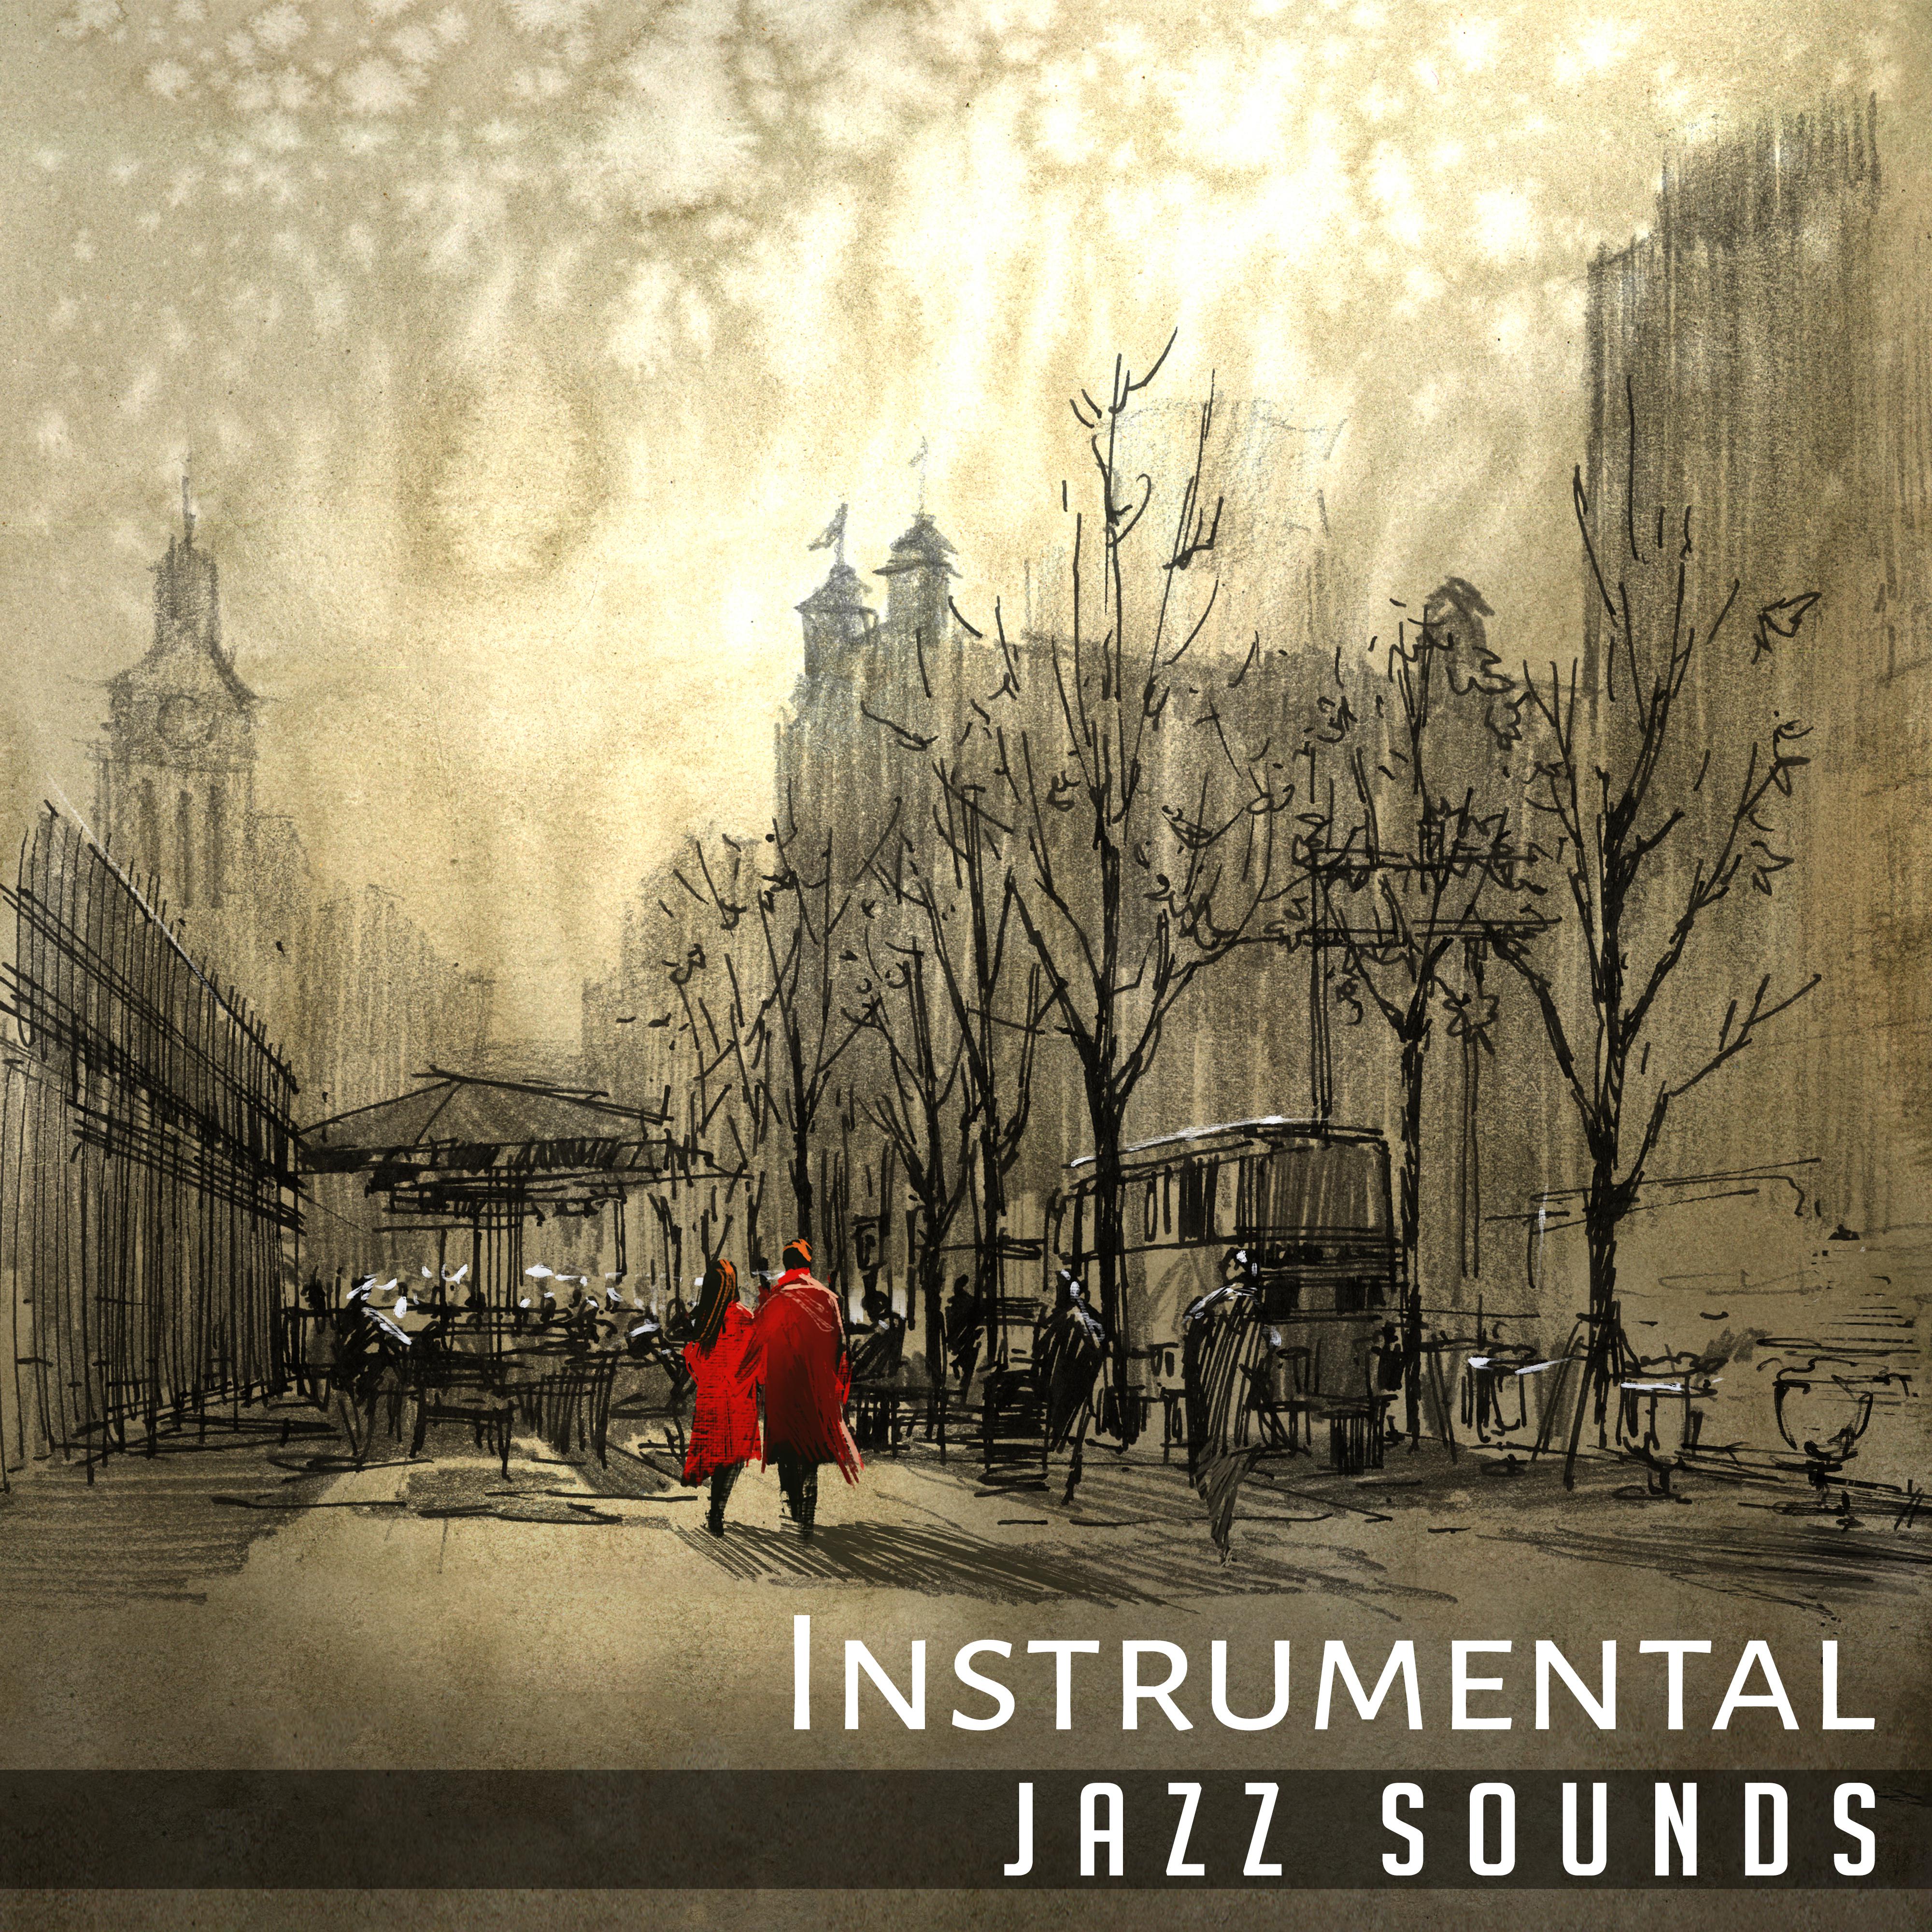 Instrumental Jazz Sounds  Soothing Jazz Music, Sounds to Relax, Peaceful Jazz Note